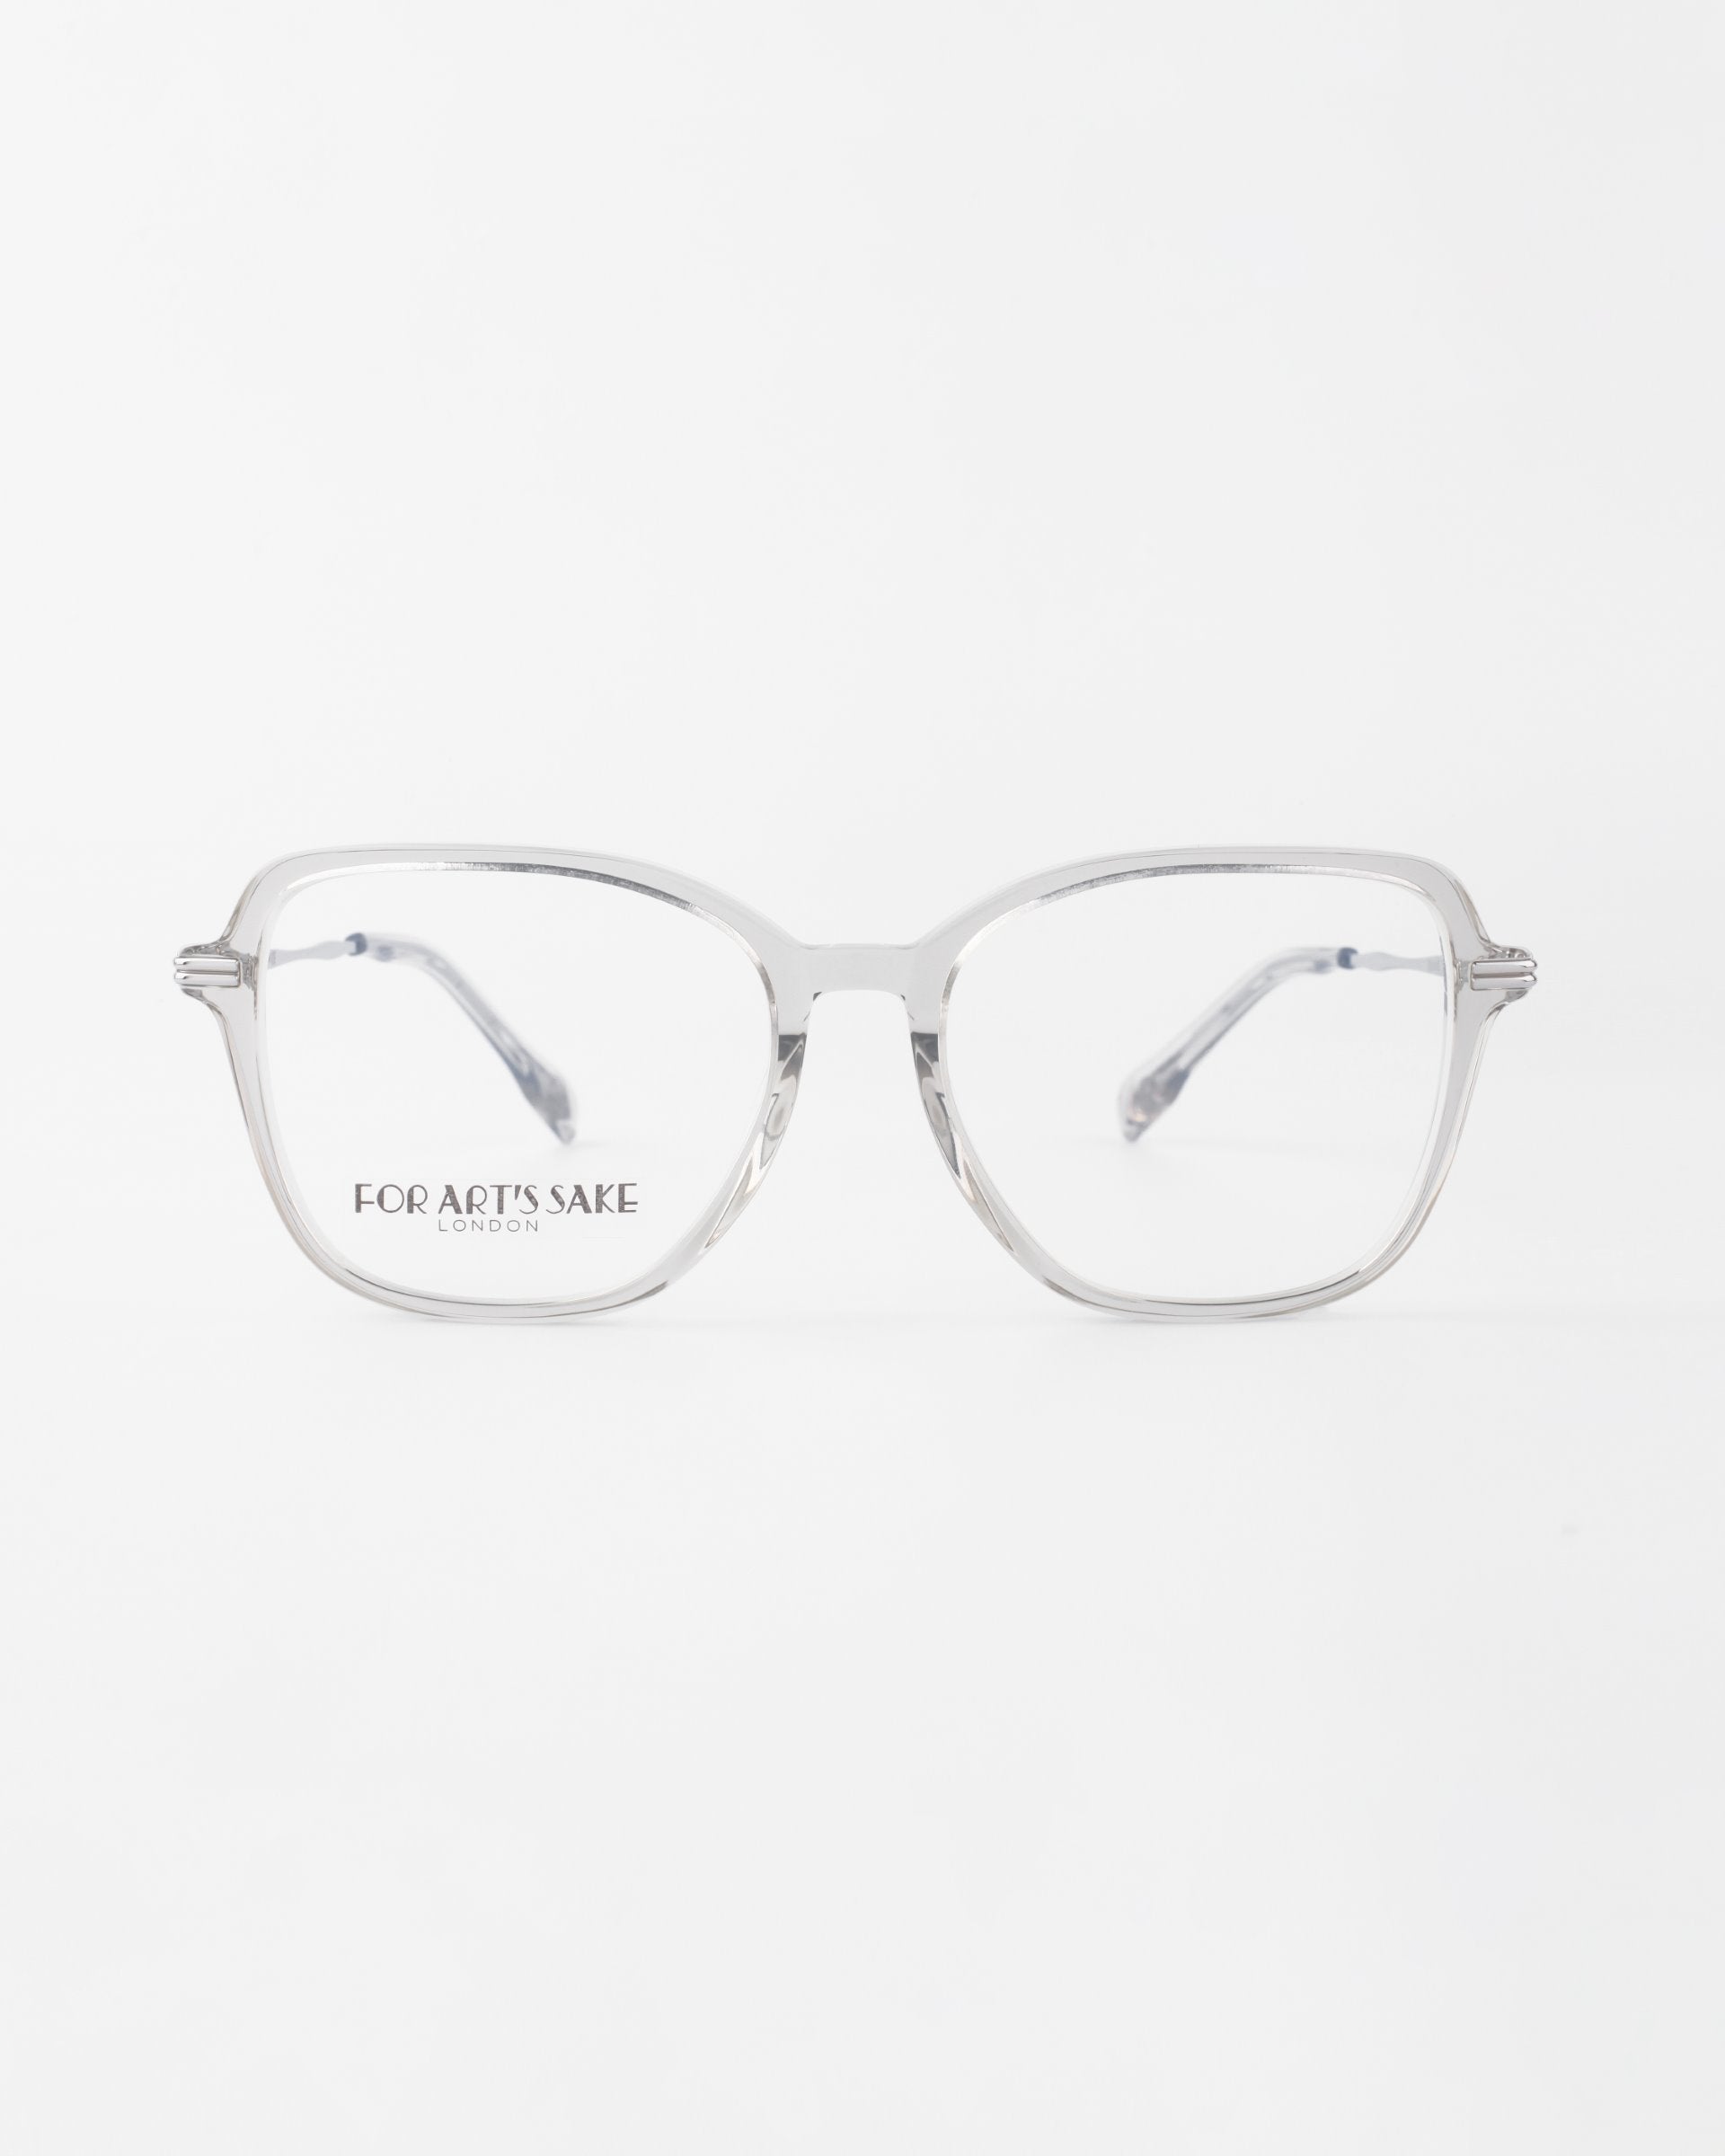 Clear, square-rimmed glasses with a silver metal frame and prescription lenses, inscribed with &quot;For Art&#39;s Sake® London&quot; on the left lens, placed against a plain white background.